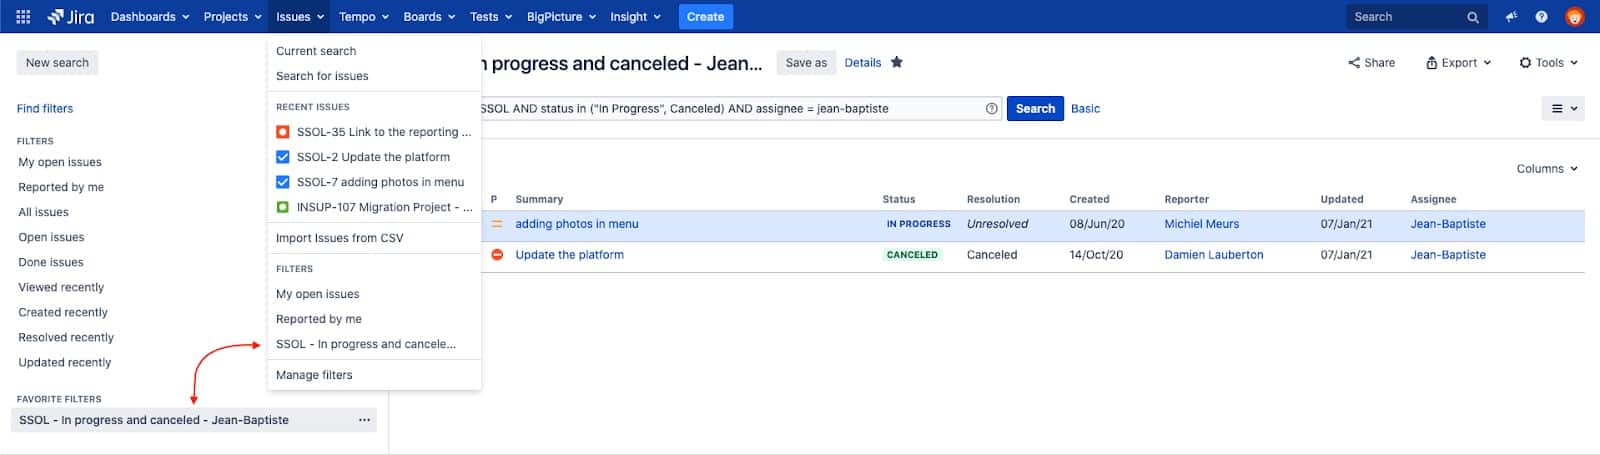 view all jira filters 